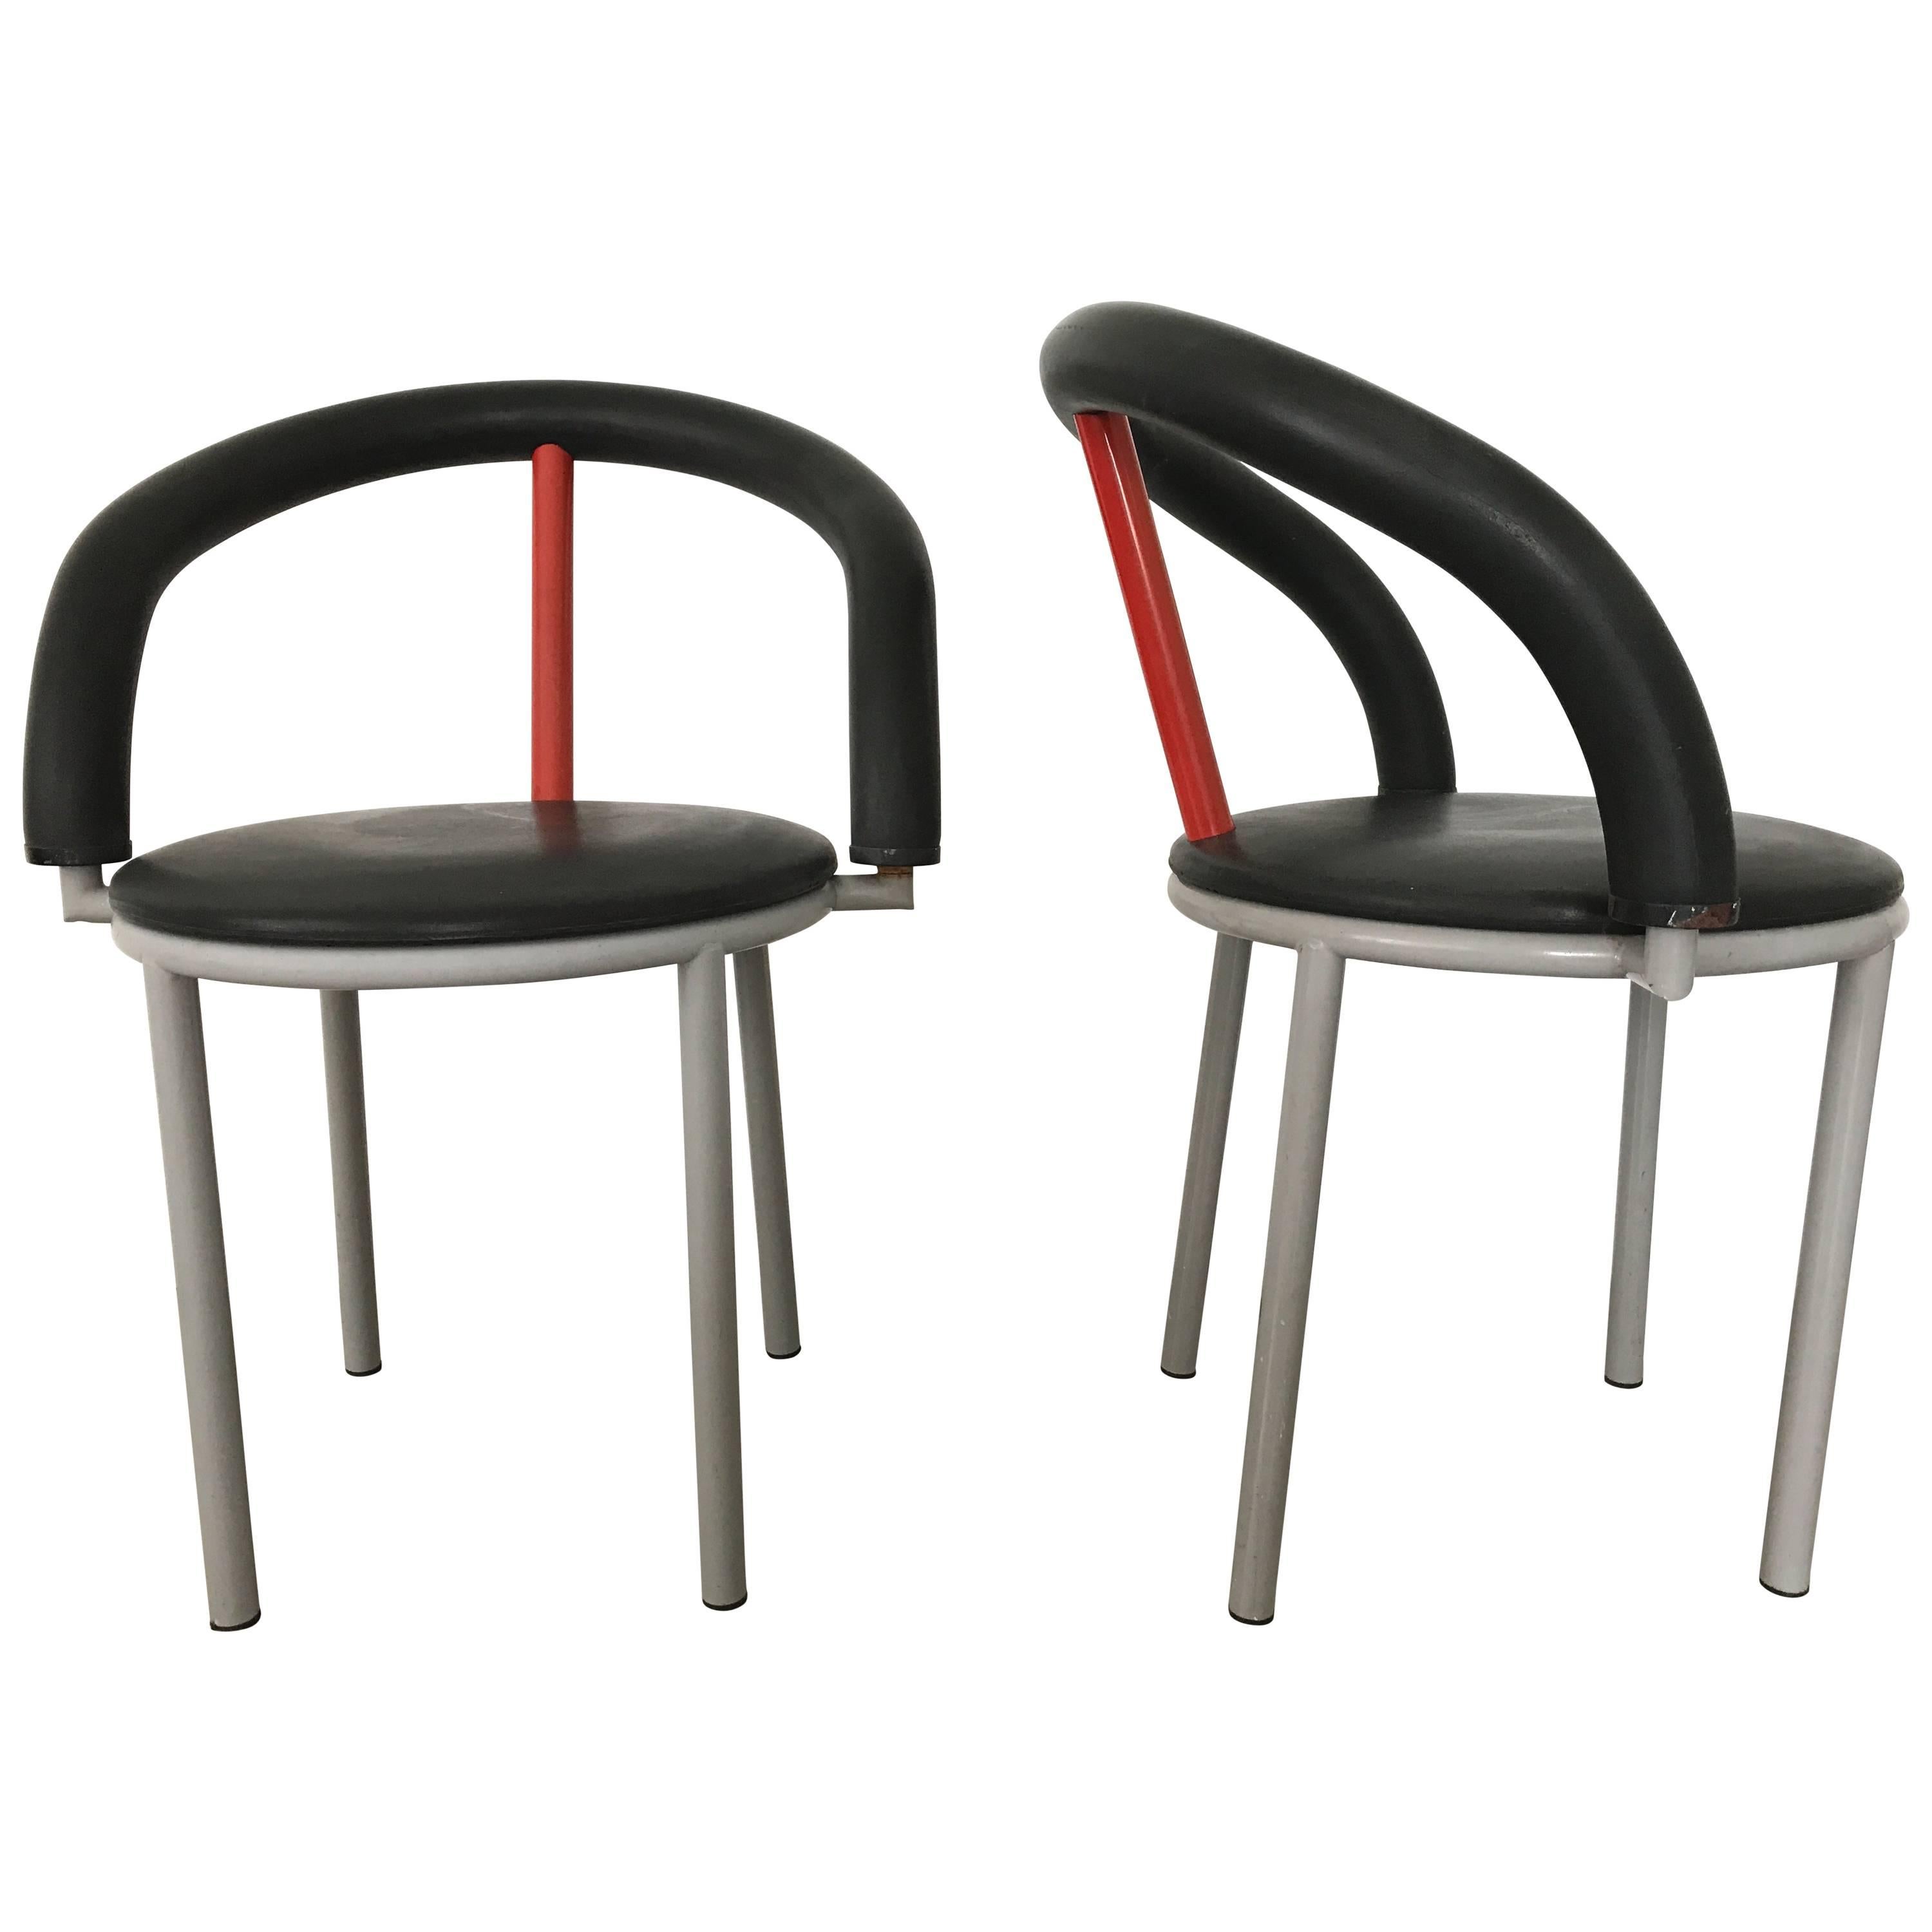 Post Modern Pair of "Alfa" Chairs by Anna Anselmi for Bieffeplast, Italy, 1985 For Sale